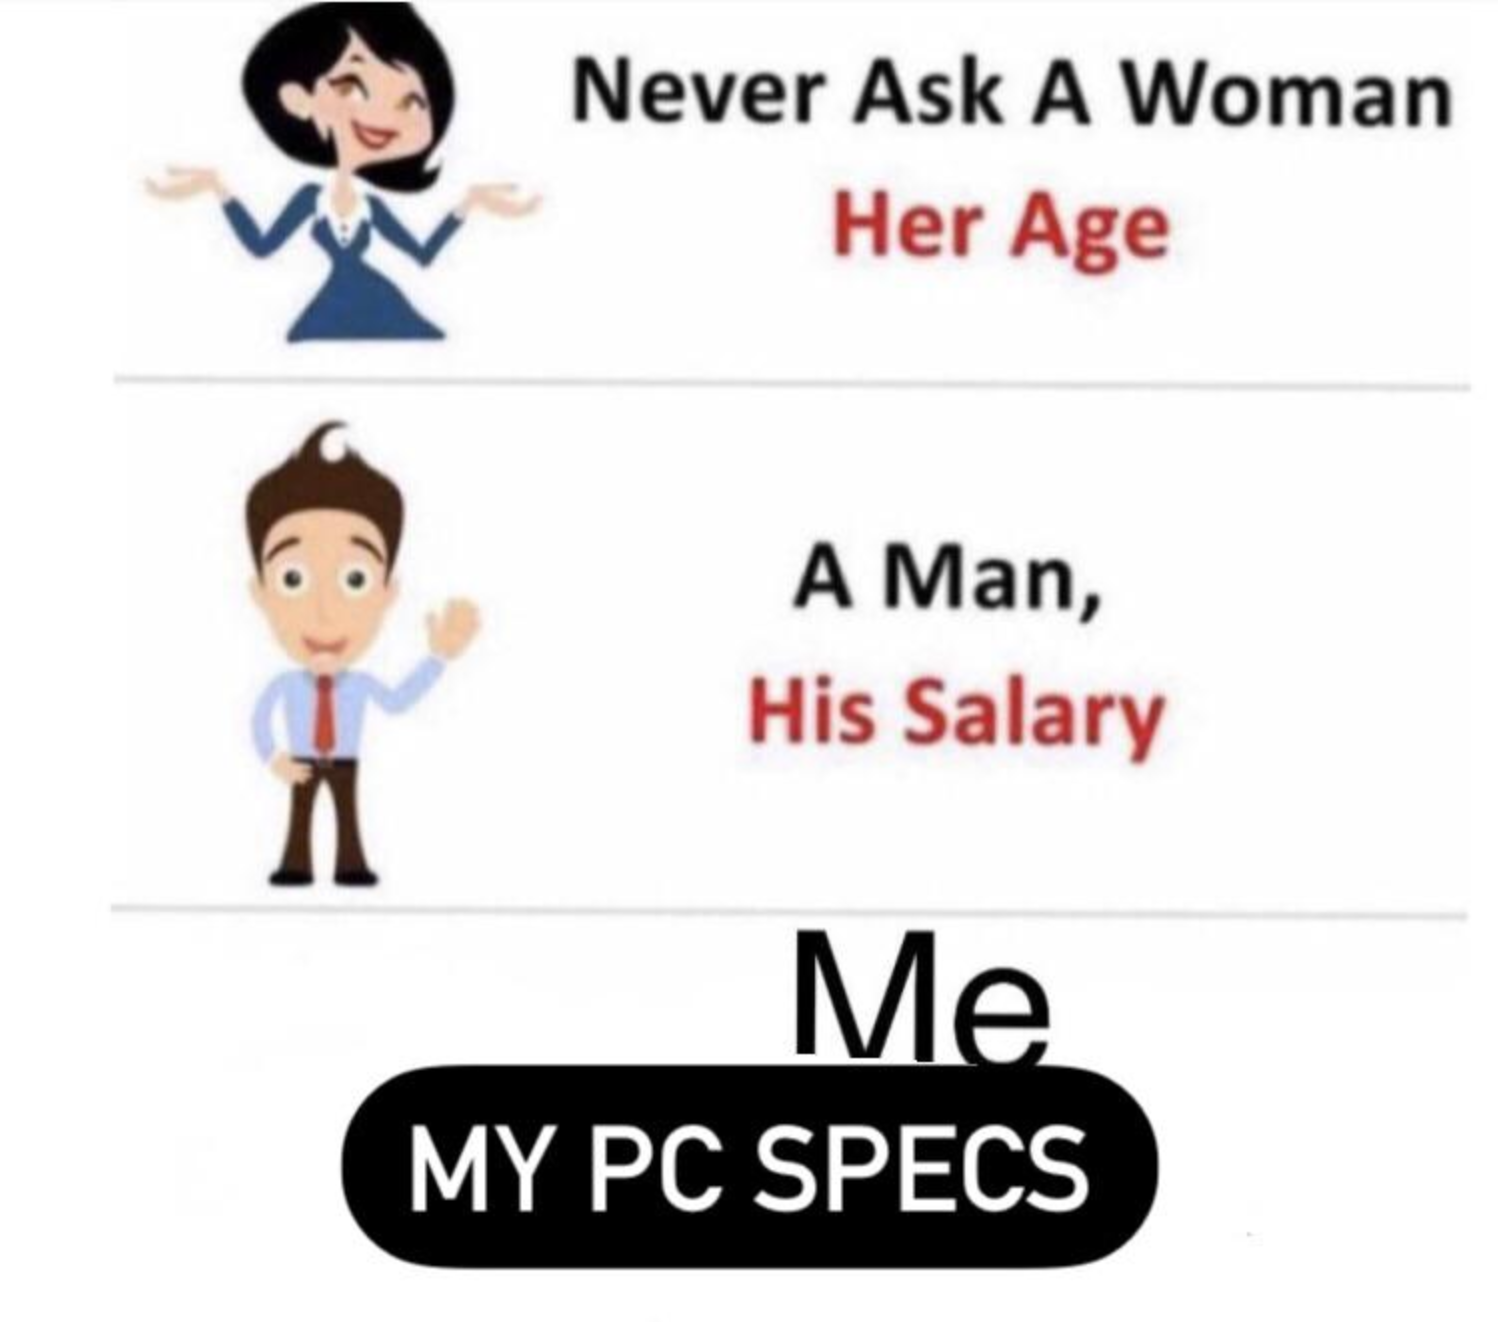 PC Gaming Memes - cbc - A Never Ask A Woman Her Age A Man, His Salary Me My Pc Specs